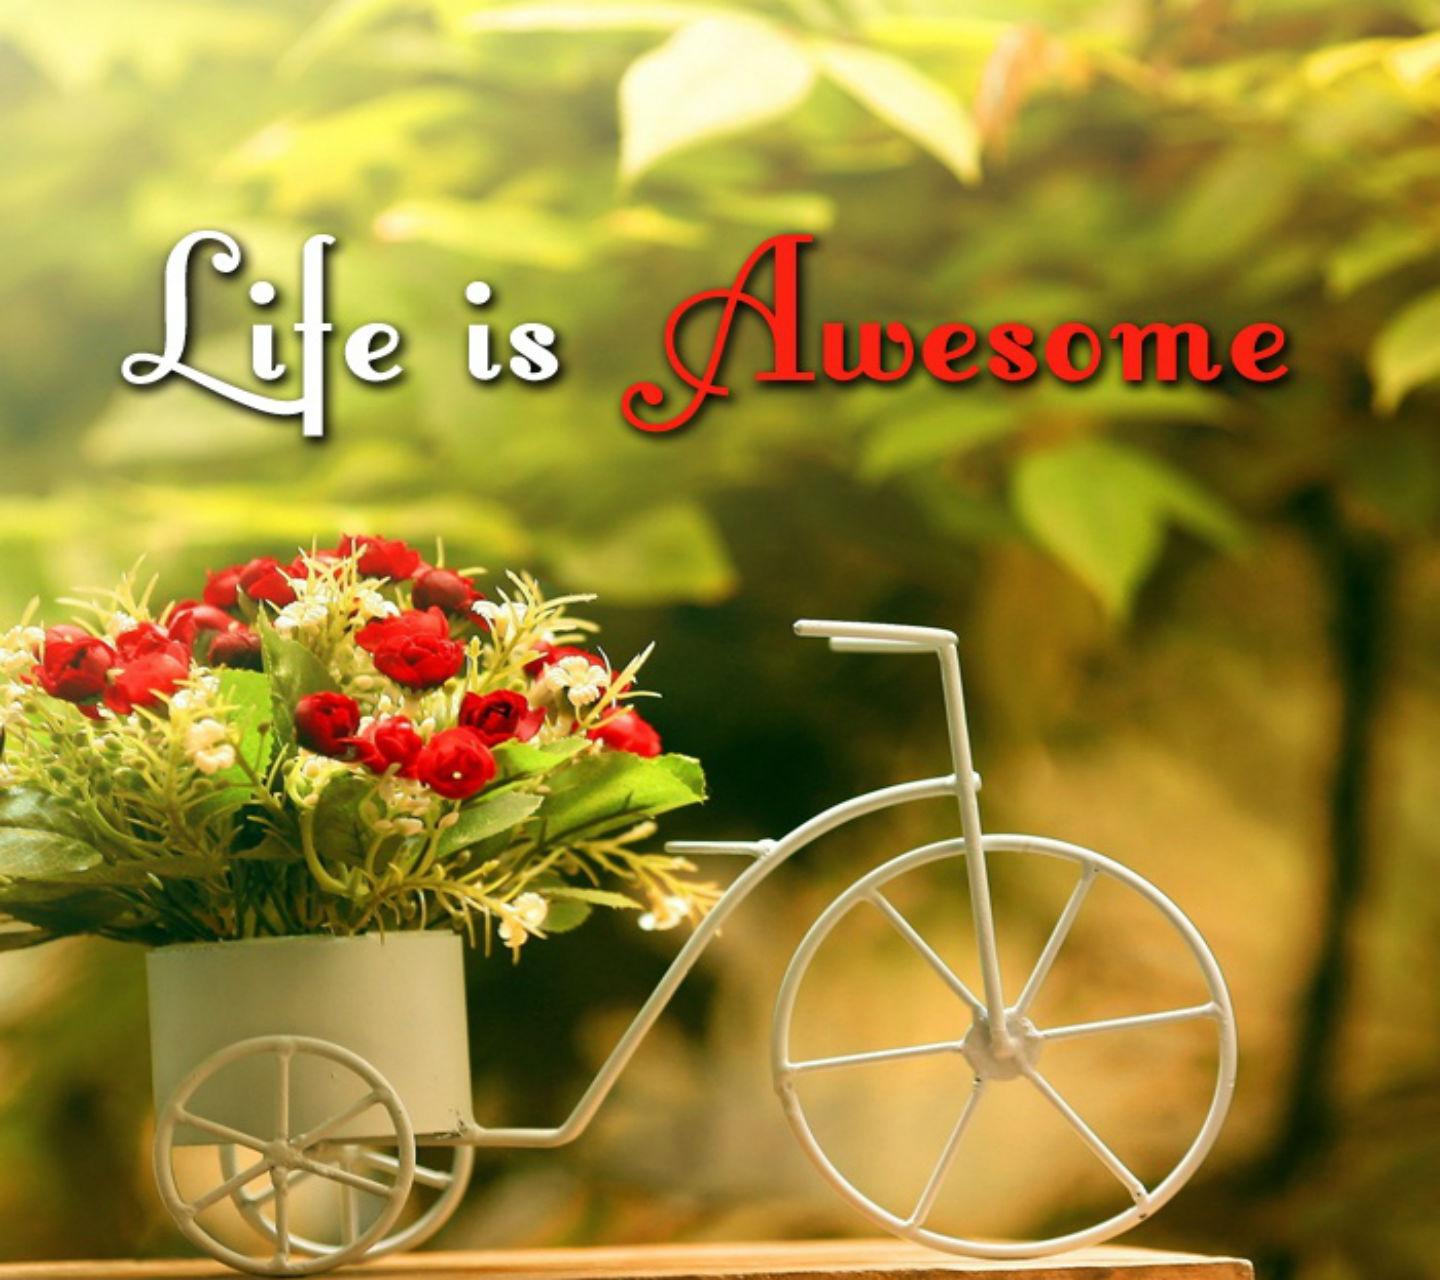 Download Simple life hd wallpaper for laptop - Saying quote wallpapers for  your mobile cell phone